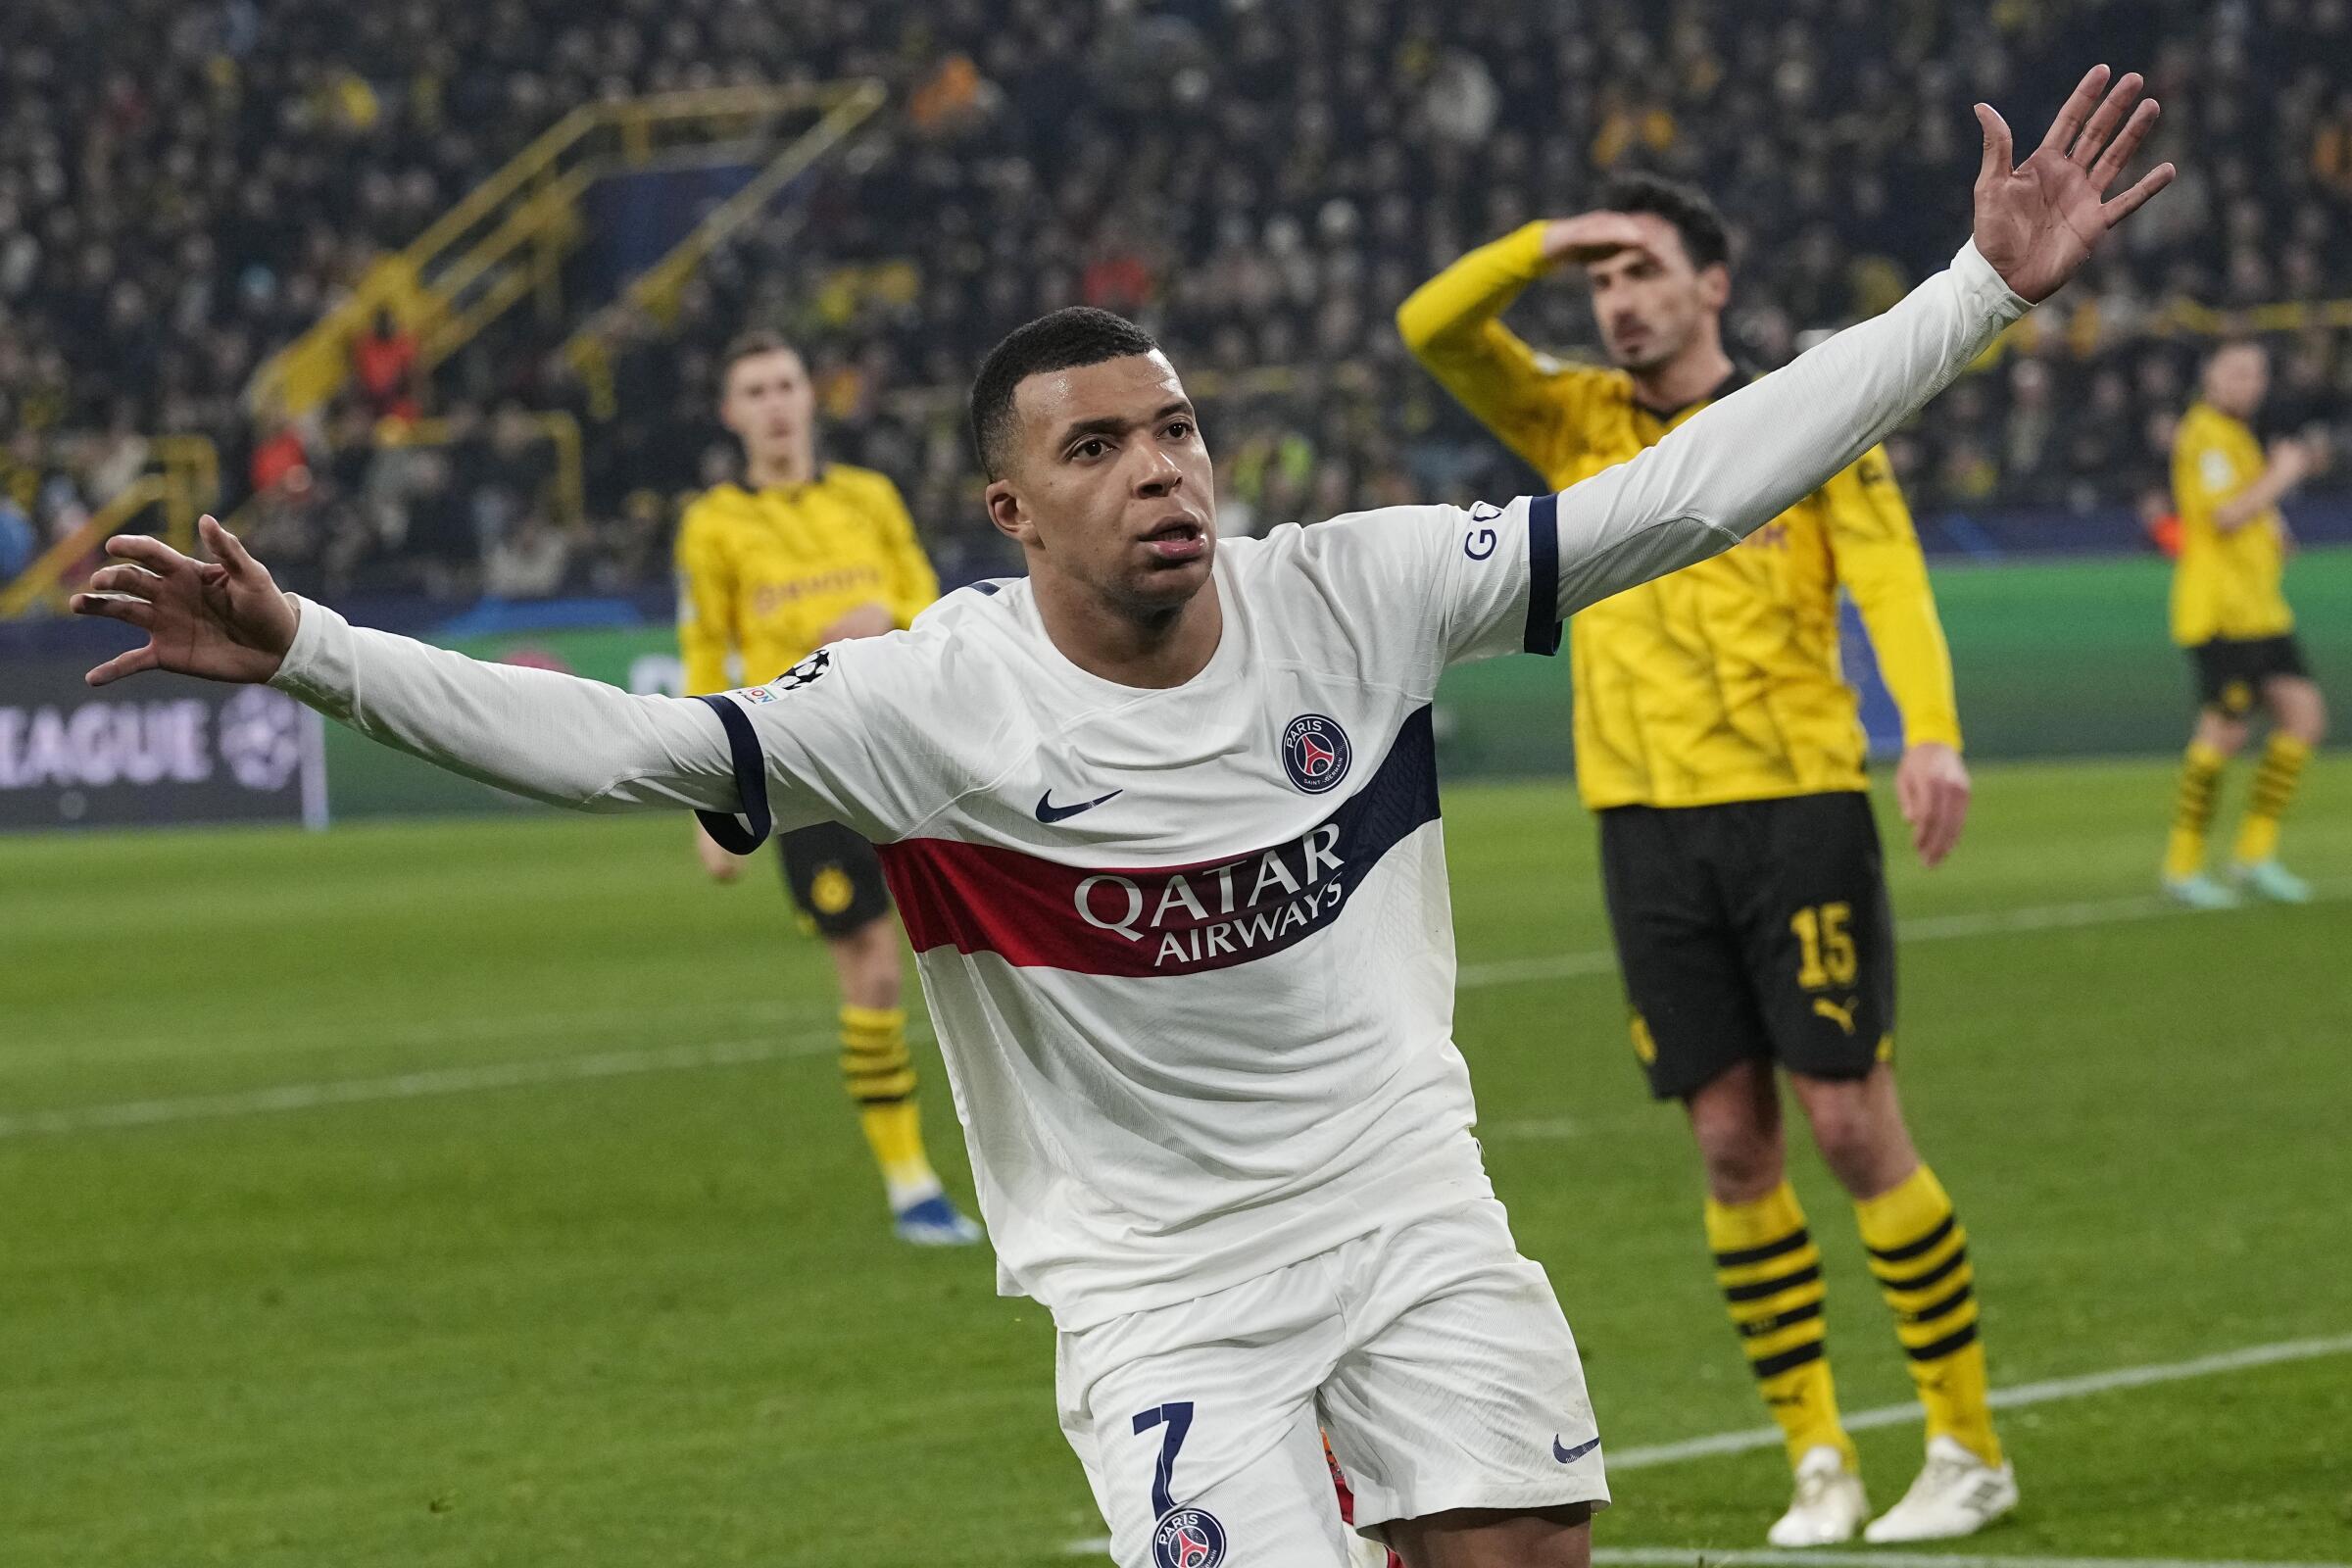 Kylian Mbappe holds out his arms after scoring a goal for Paris Saint-Germain in Champions League play.